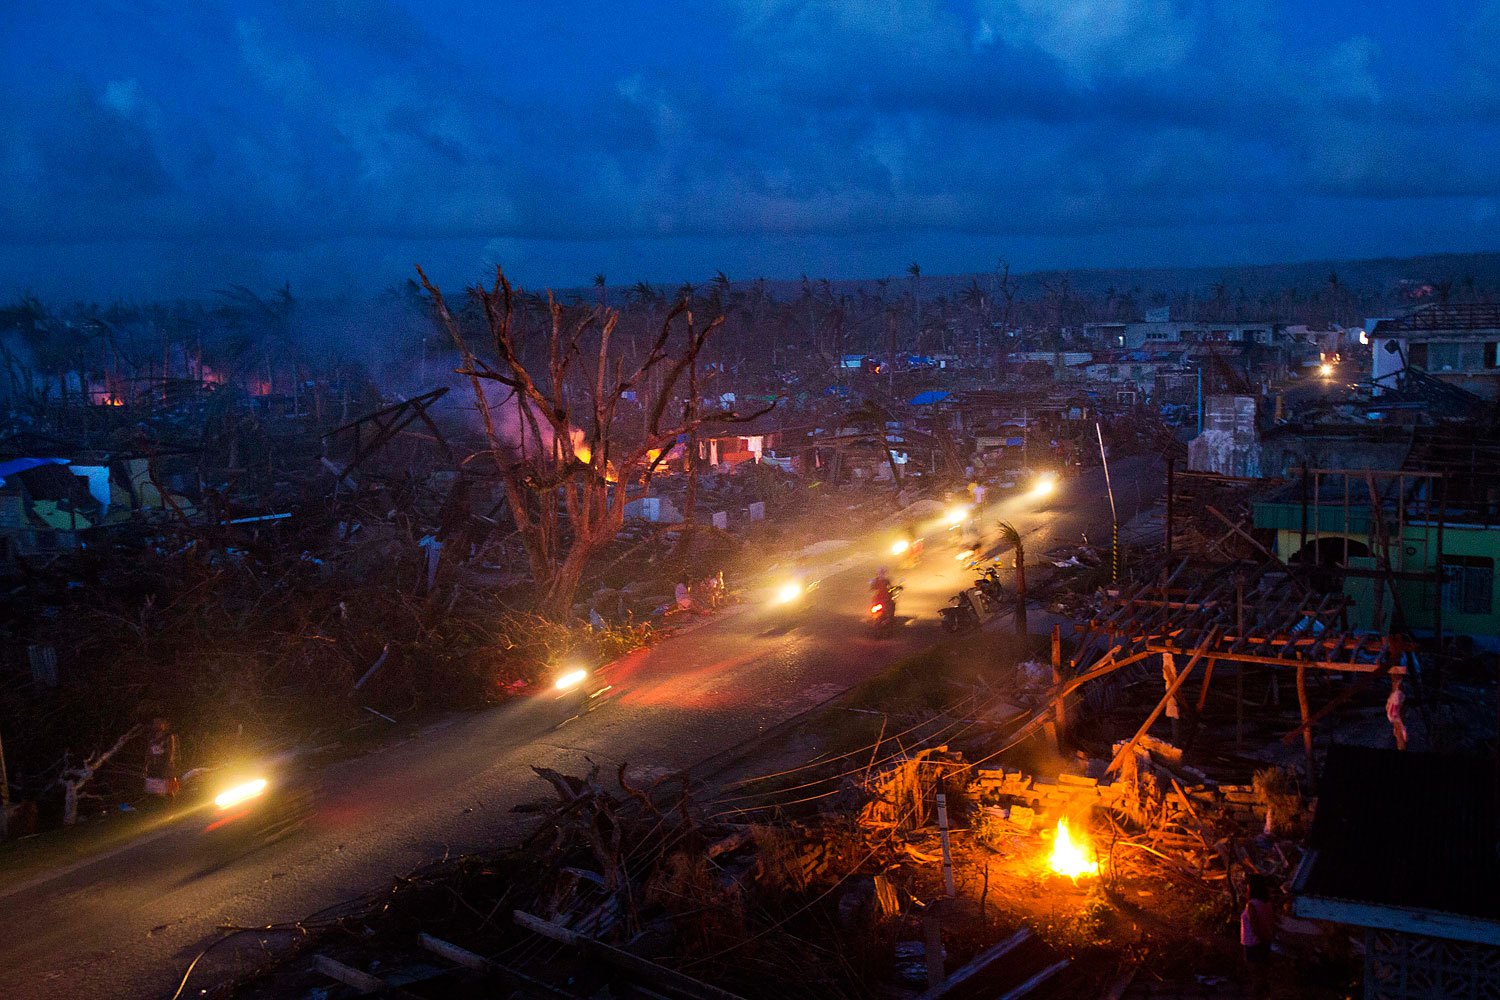 Typhoon Haiyan survivors ride motorbikes through the ruins of the destroyed town of Guiuan, Philippines on November 14, 2013.